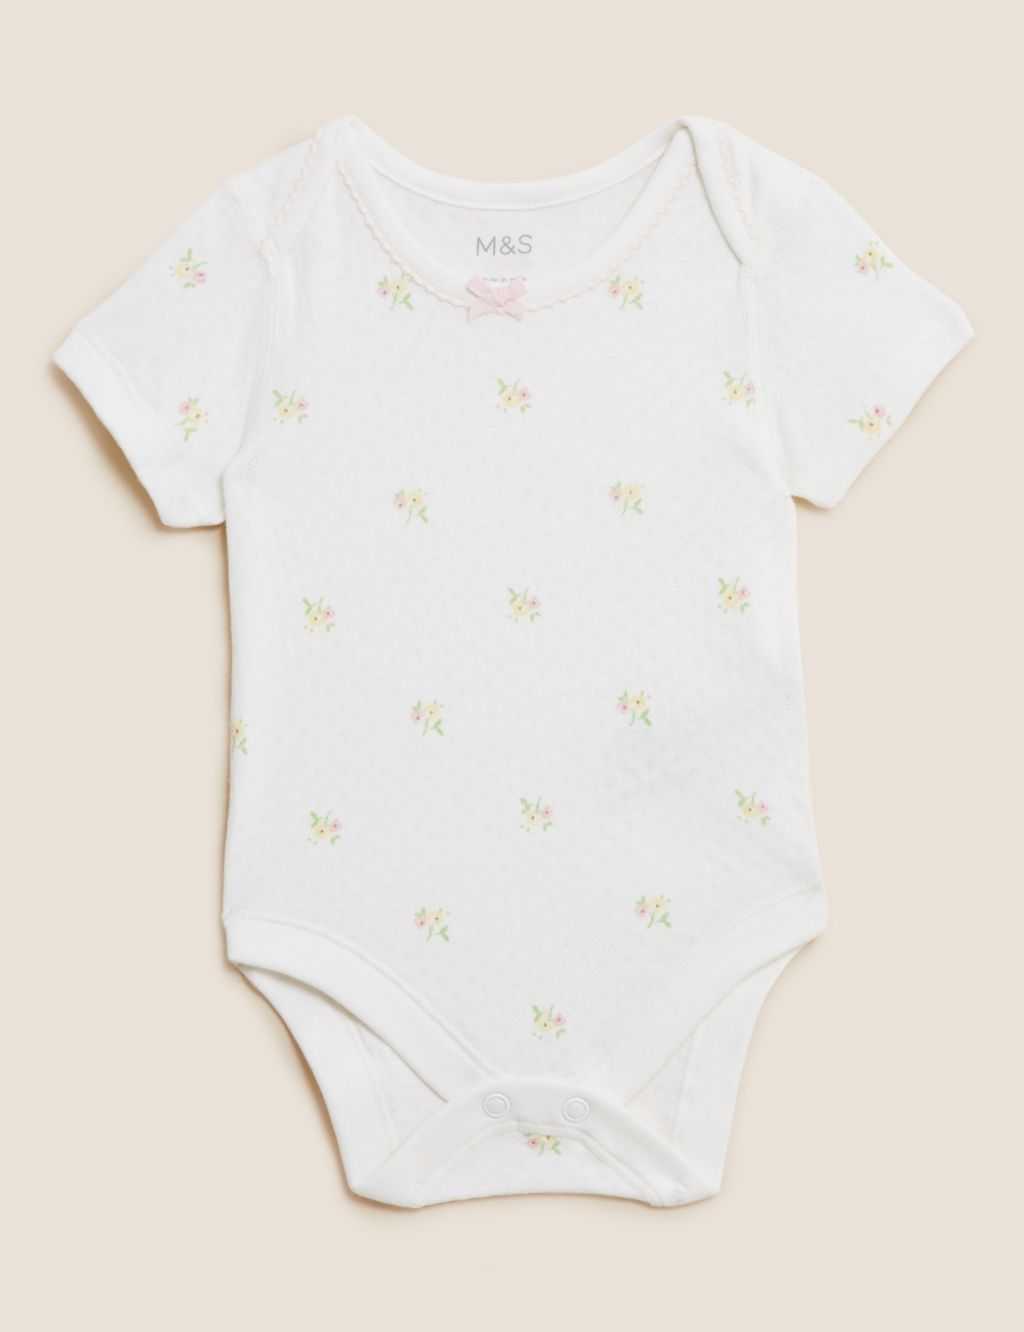 3pk Pure Cotton Patterned Bodysuits (61/2 lbs - 3 Yrs) image 5